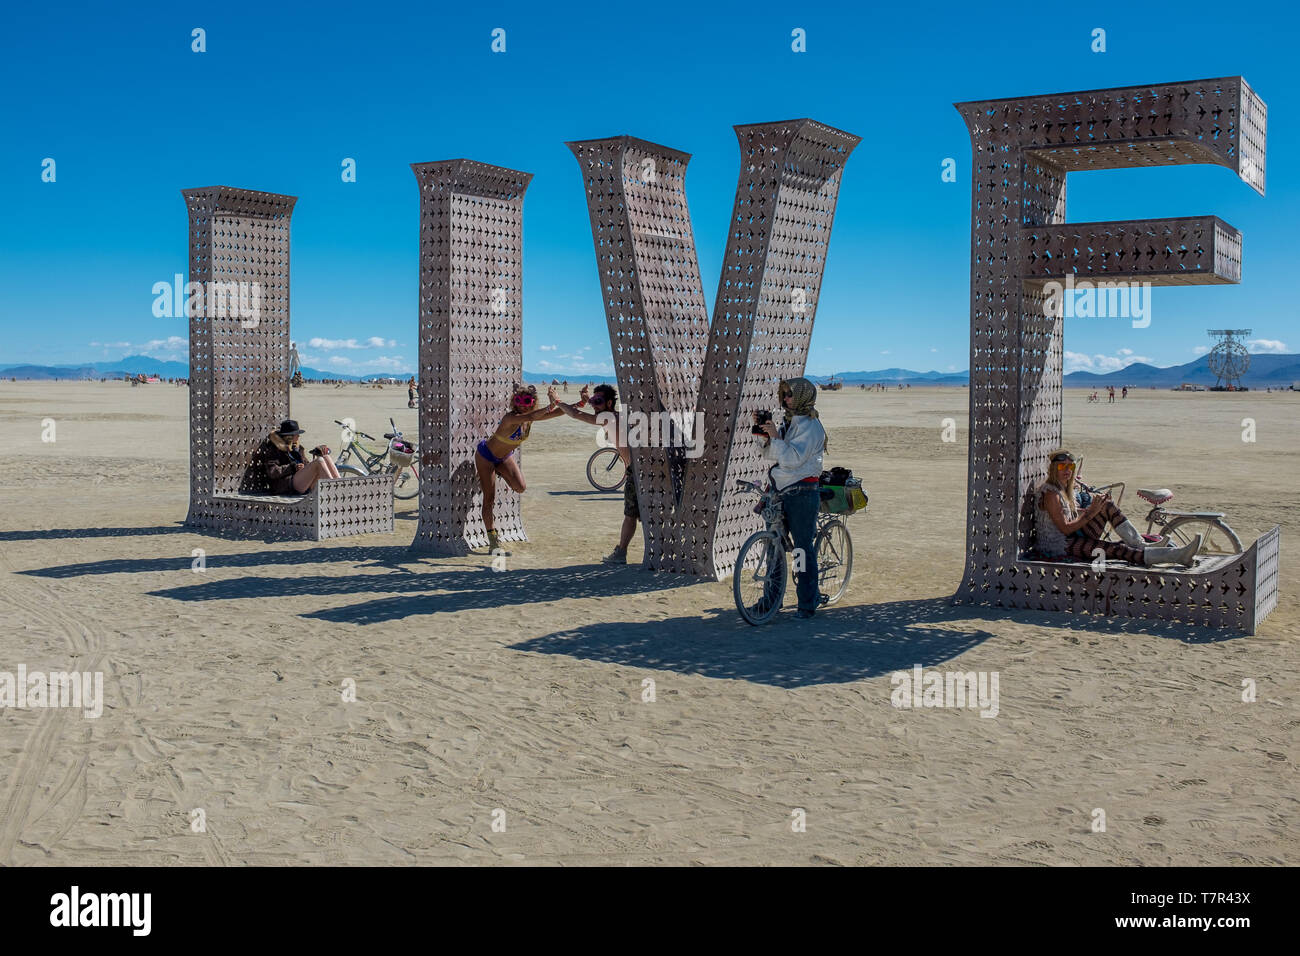 Burning Man, Nevada, USA, September, 6, 2015: Attendees at Burning Man festival sitting on and around an artwork of letters that spell out the word, LIVE against a bright blue sky. Stock Photo